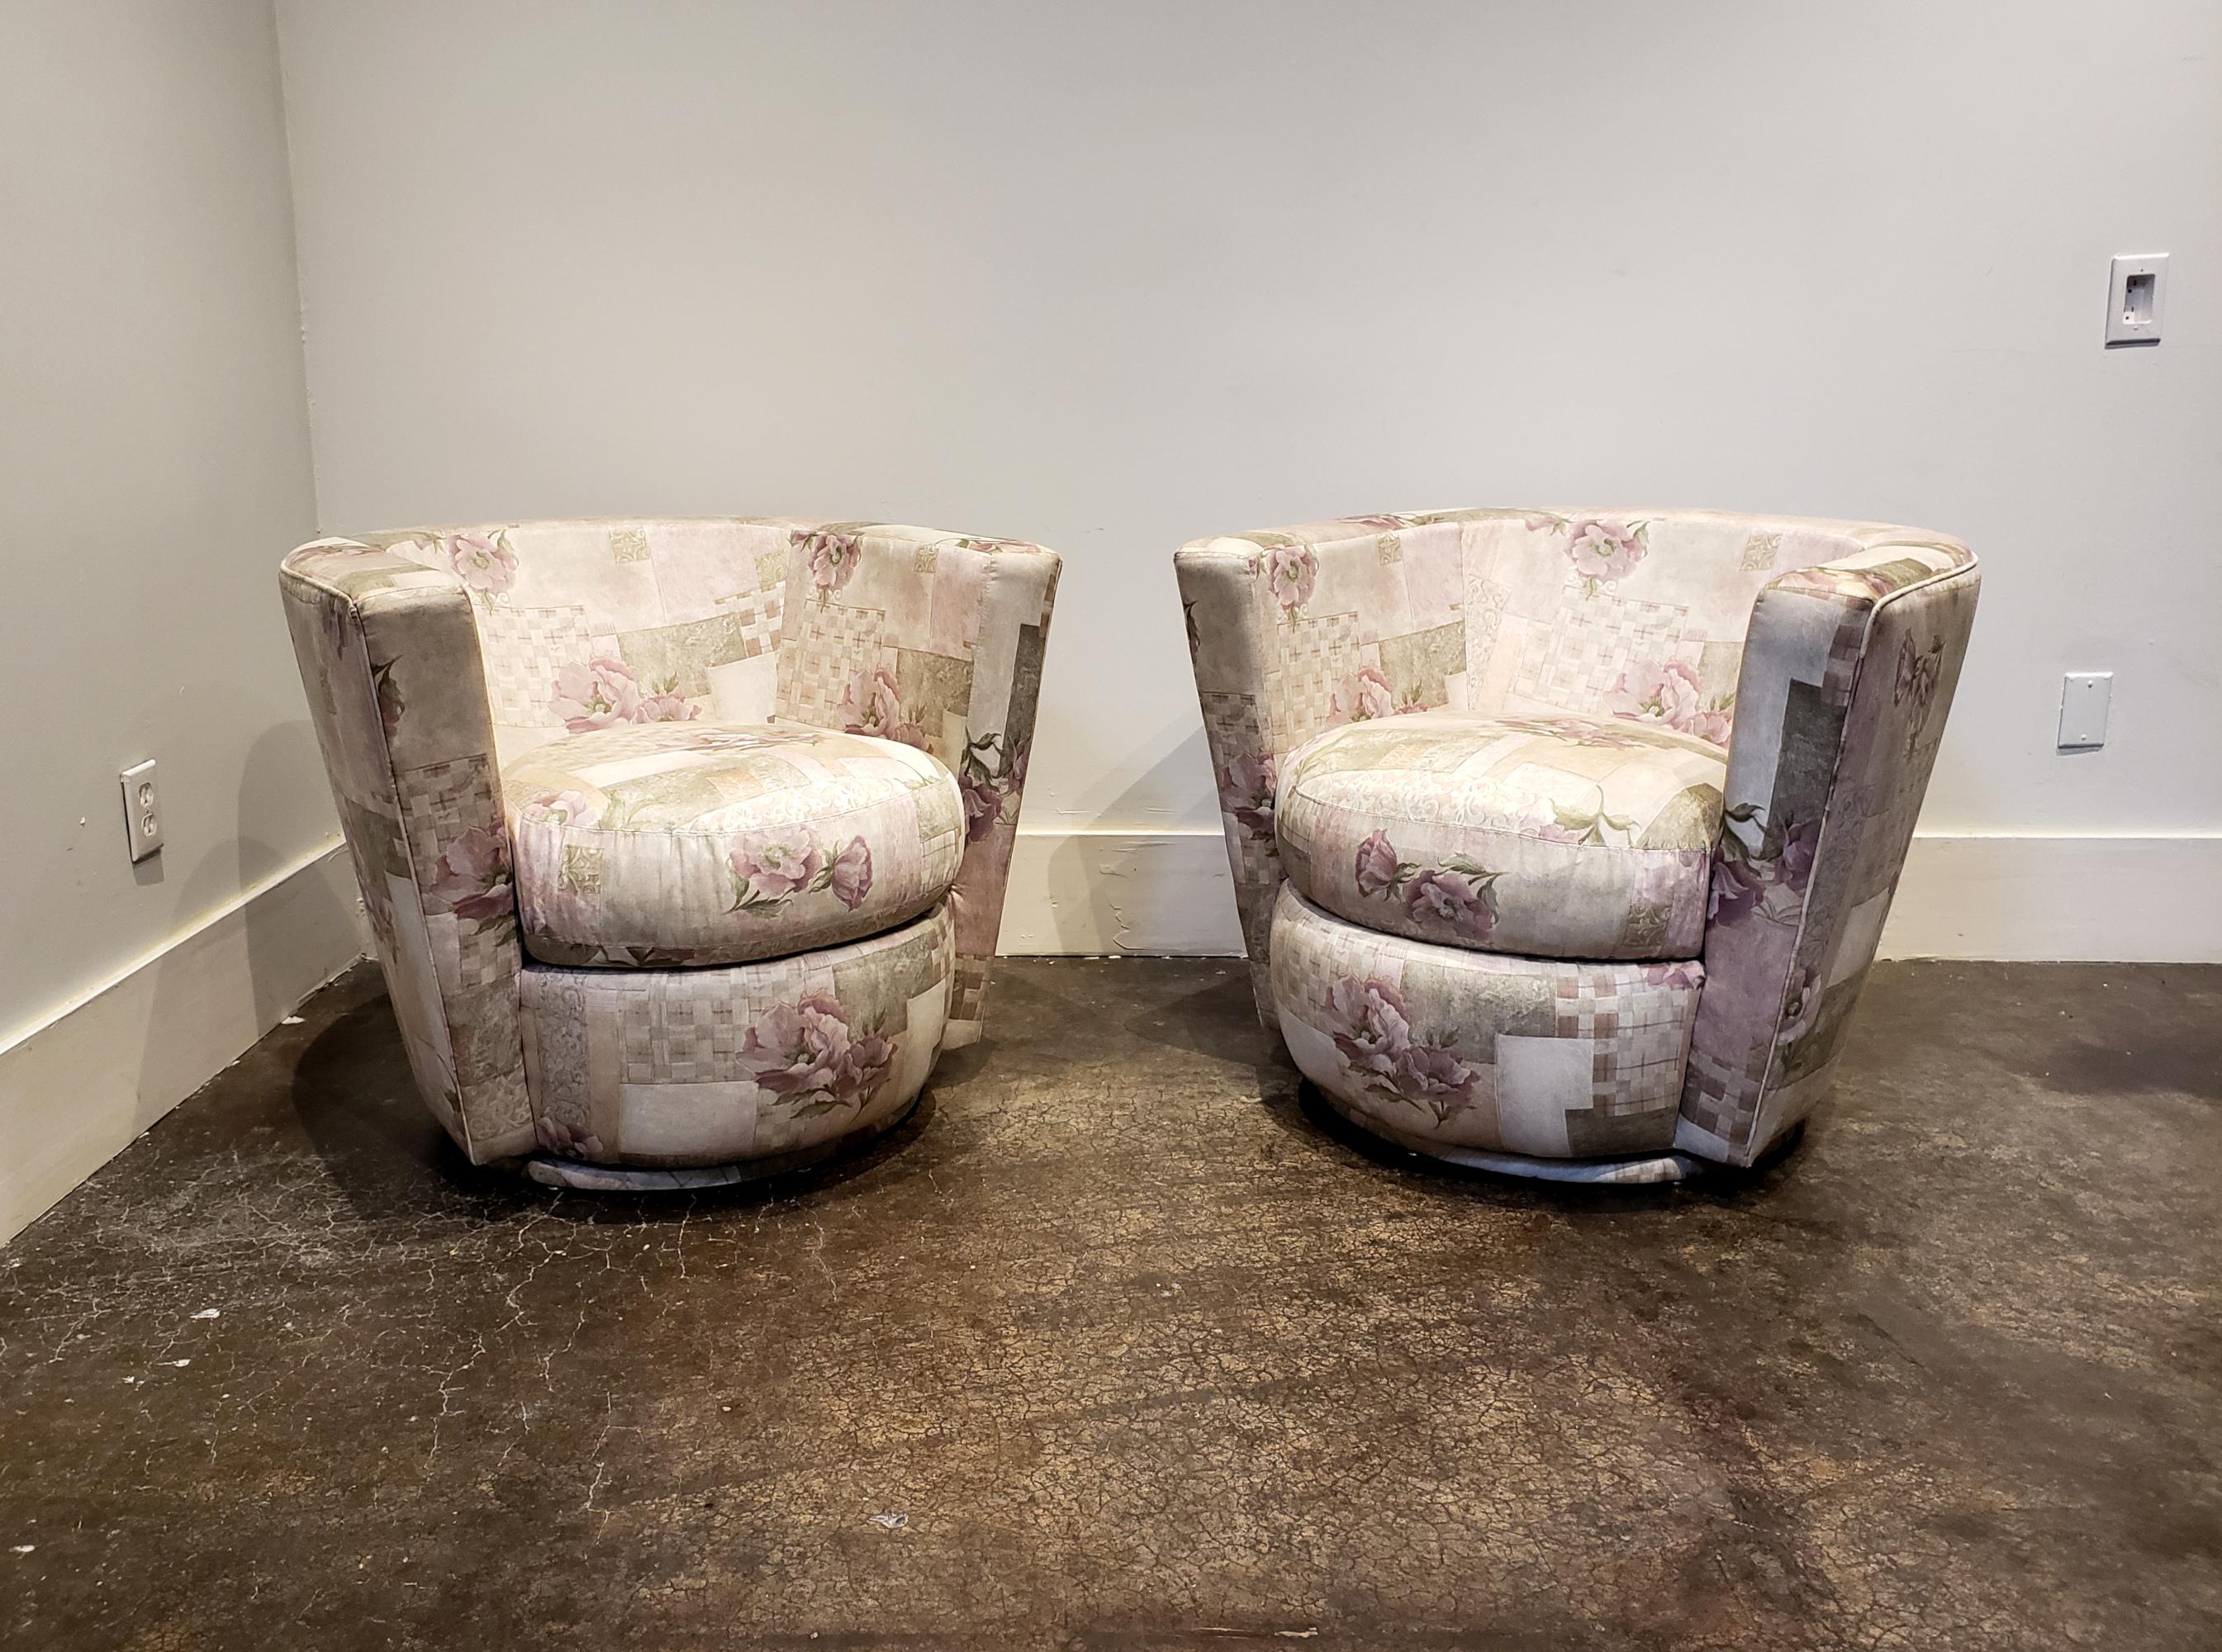 Pair of Thayer Coggin swivel tub chairs from the 1990s with original tags and tasteful floral pastel upholstery. Strong architectural shape paired with cushy comfort. Upholstery is in good shape with minor edge wear (see picture).